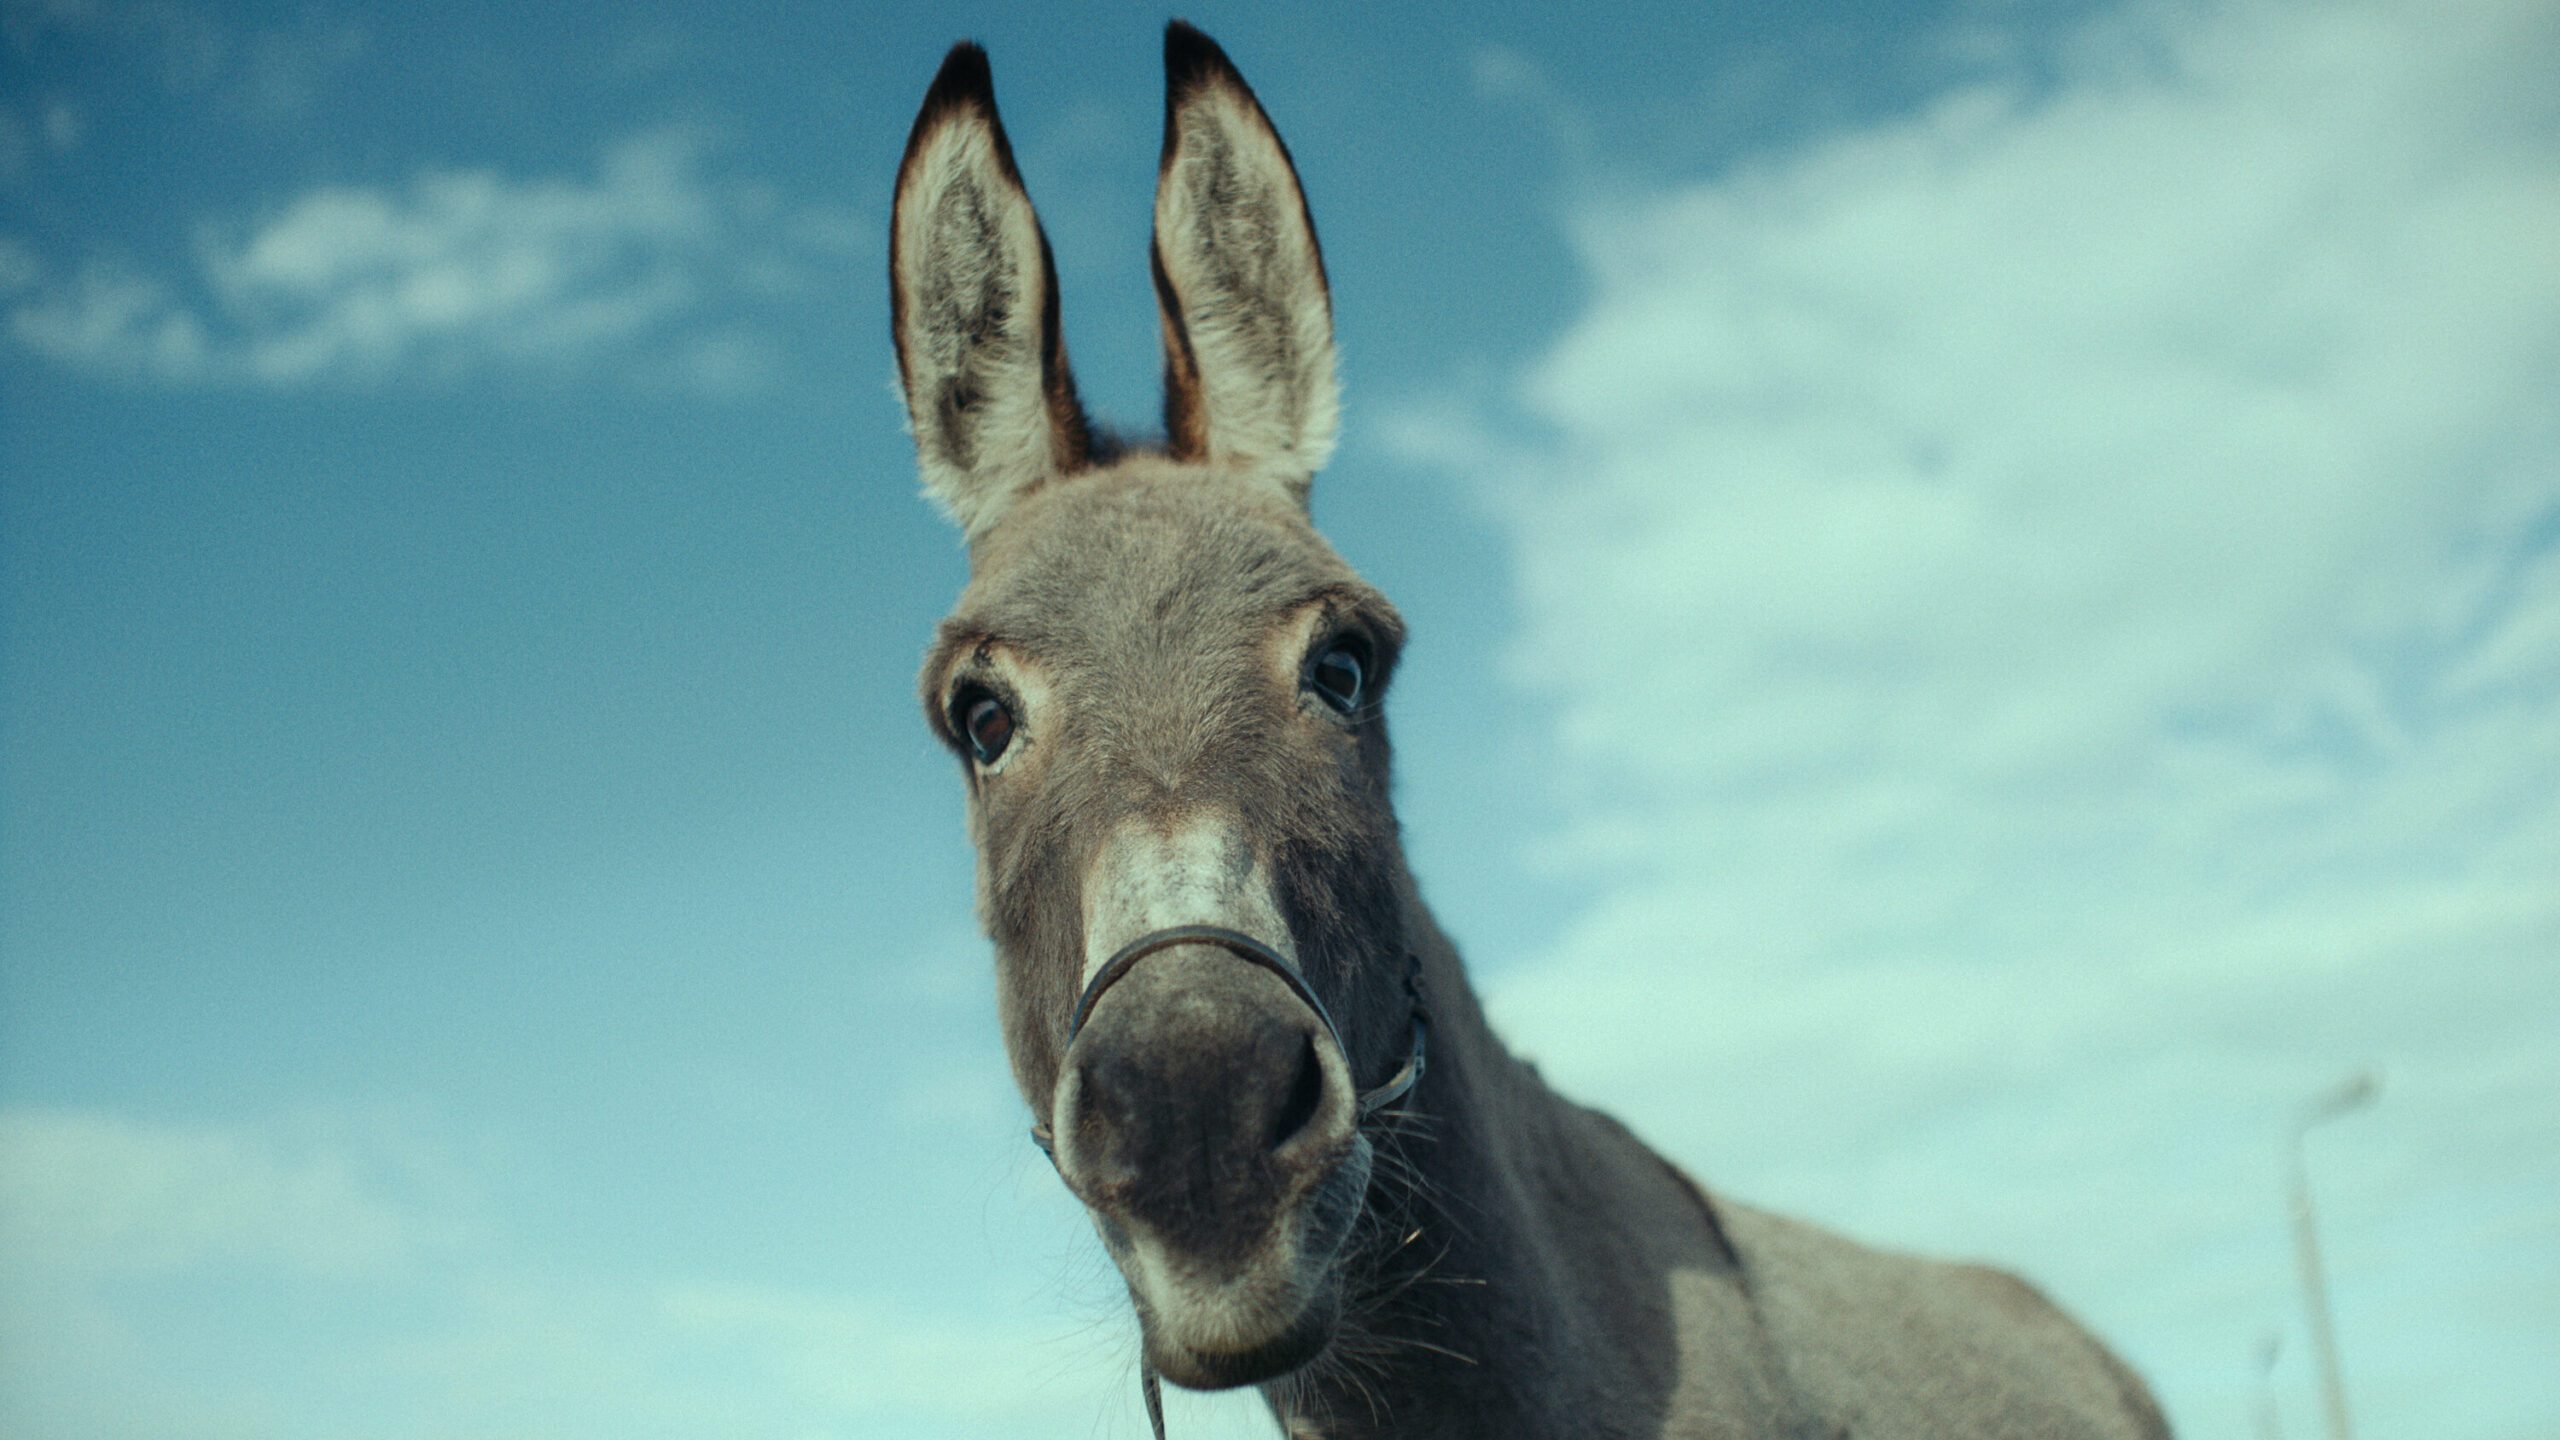 A donkey looking right in the camera for EO by Skolimowski